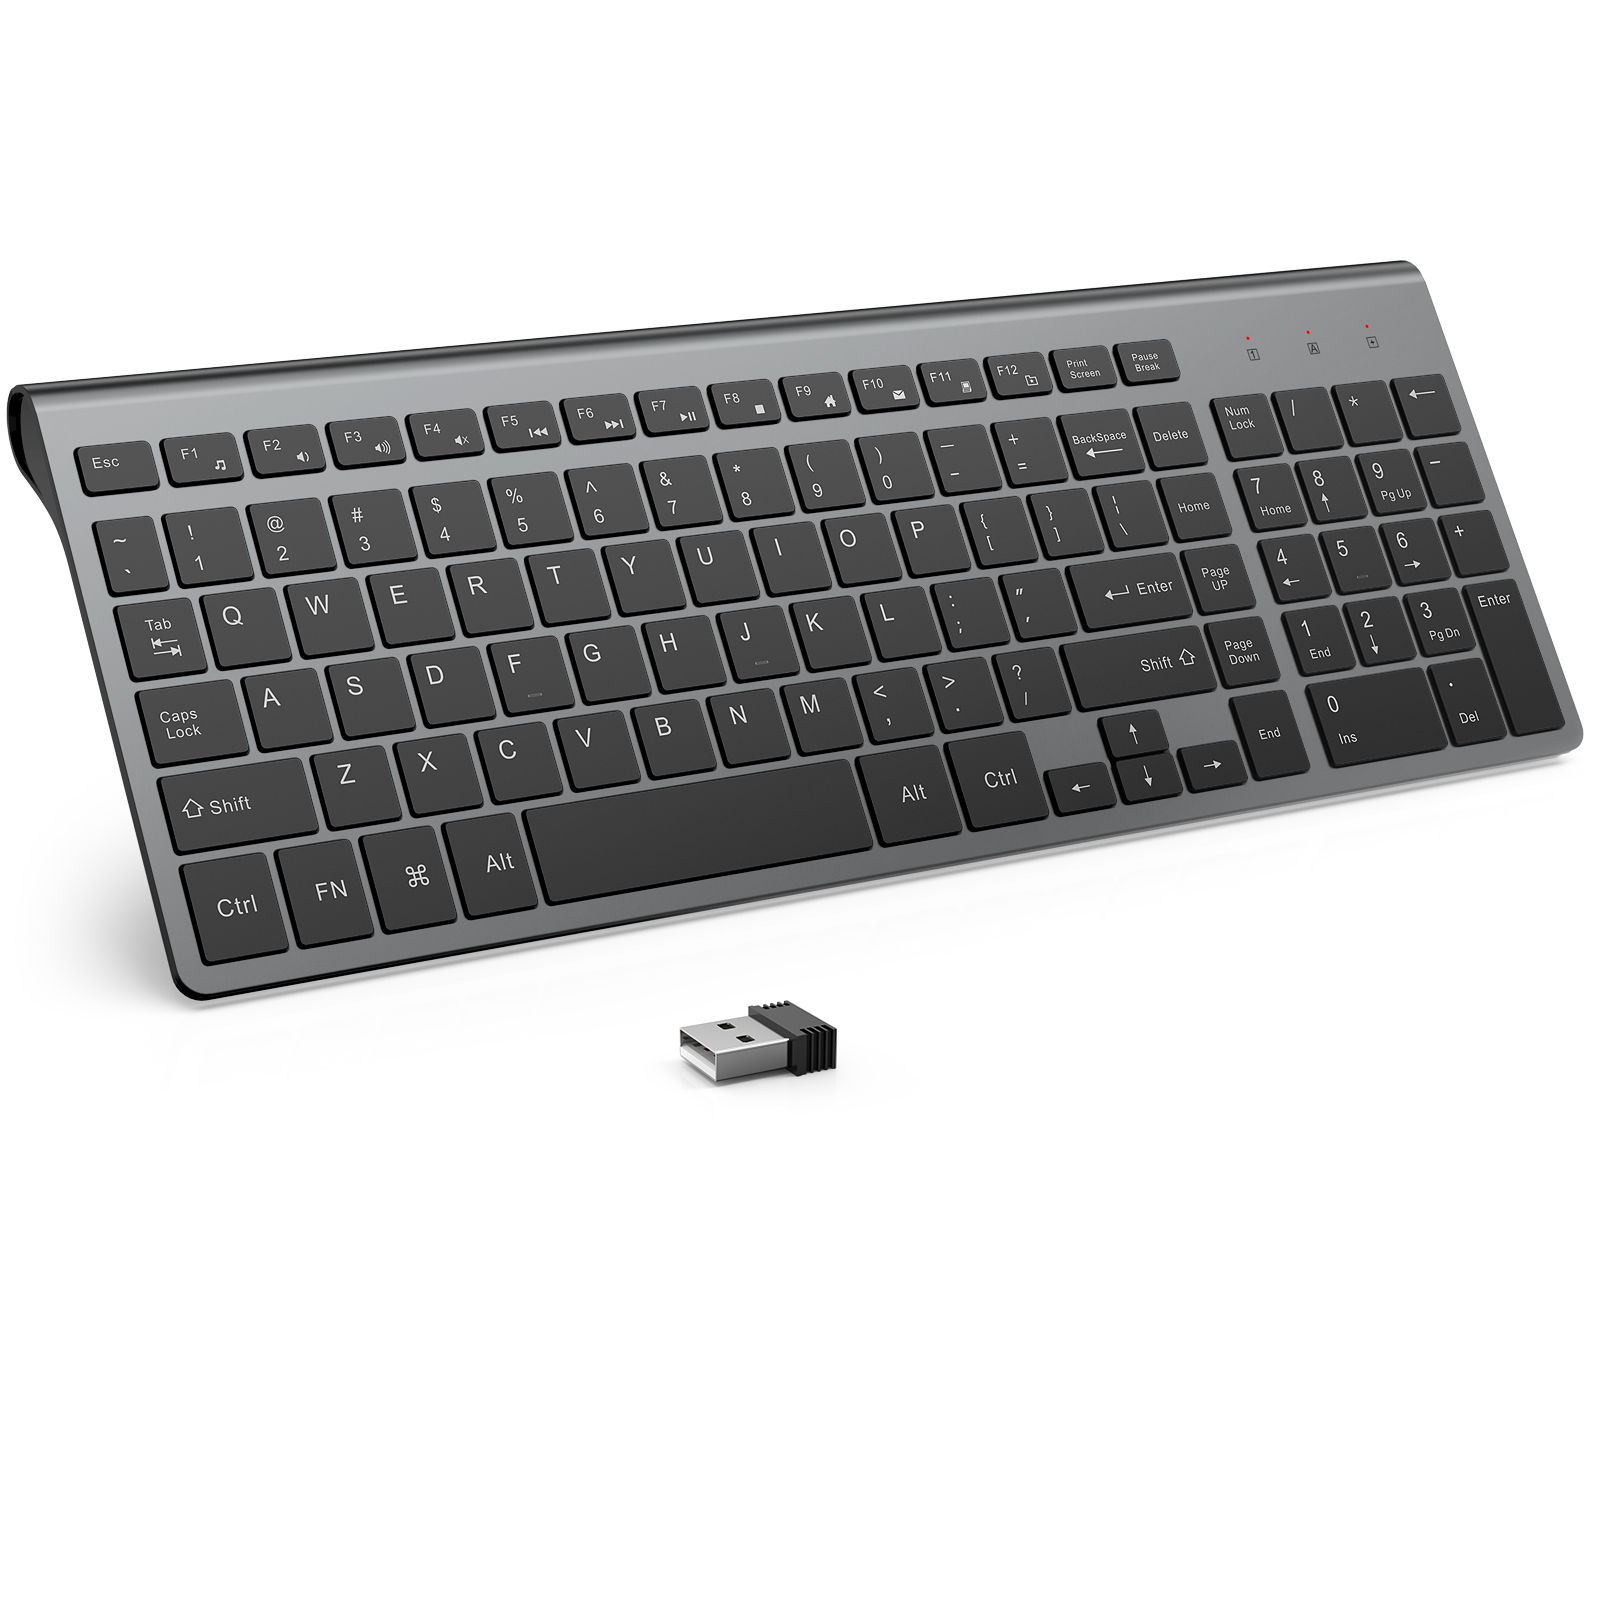 Wireless Keyboard, J JOYACCESS 2.4G Slim and Compact Wireless Keyboard with Numeric Pad for Laptop, MacBook Air, Apple, Computer, PC(Black and Grey)Wireless Keyboard Mouse Combo, J JOYACCESS 2.4G USB Compact and Slim Wireless Keyboard and Mouse Combo for PC, Laptop,Tablet,Computer Windows-Rose Gold
